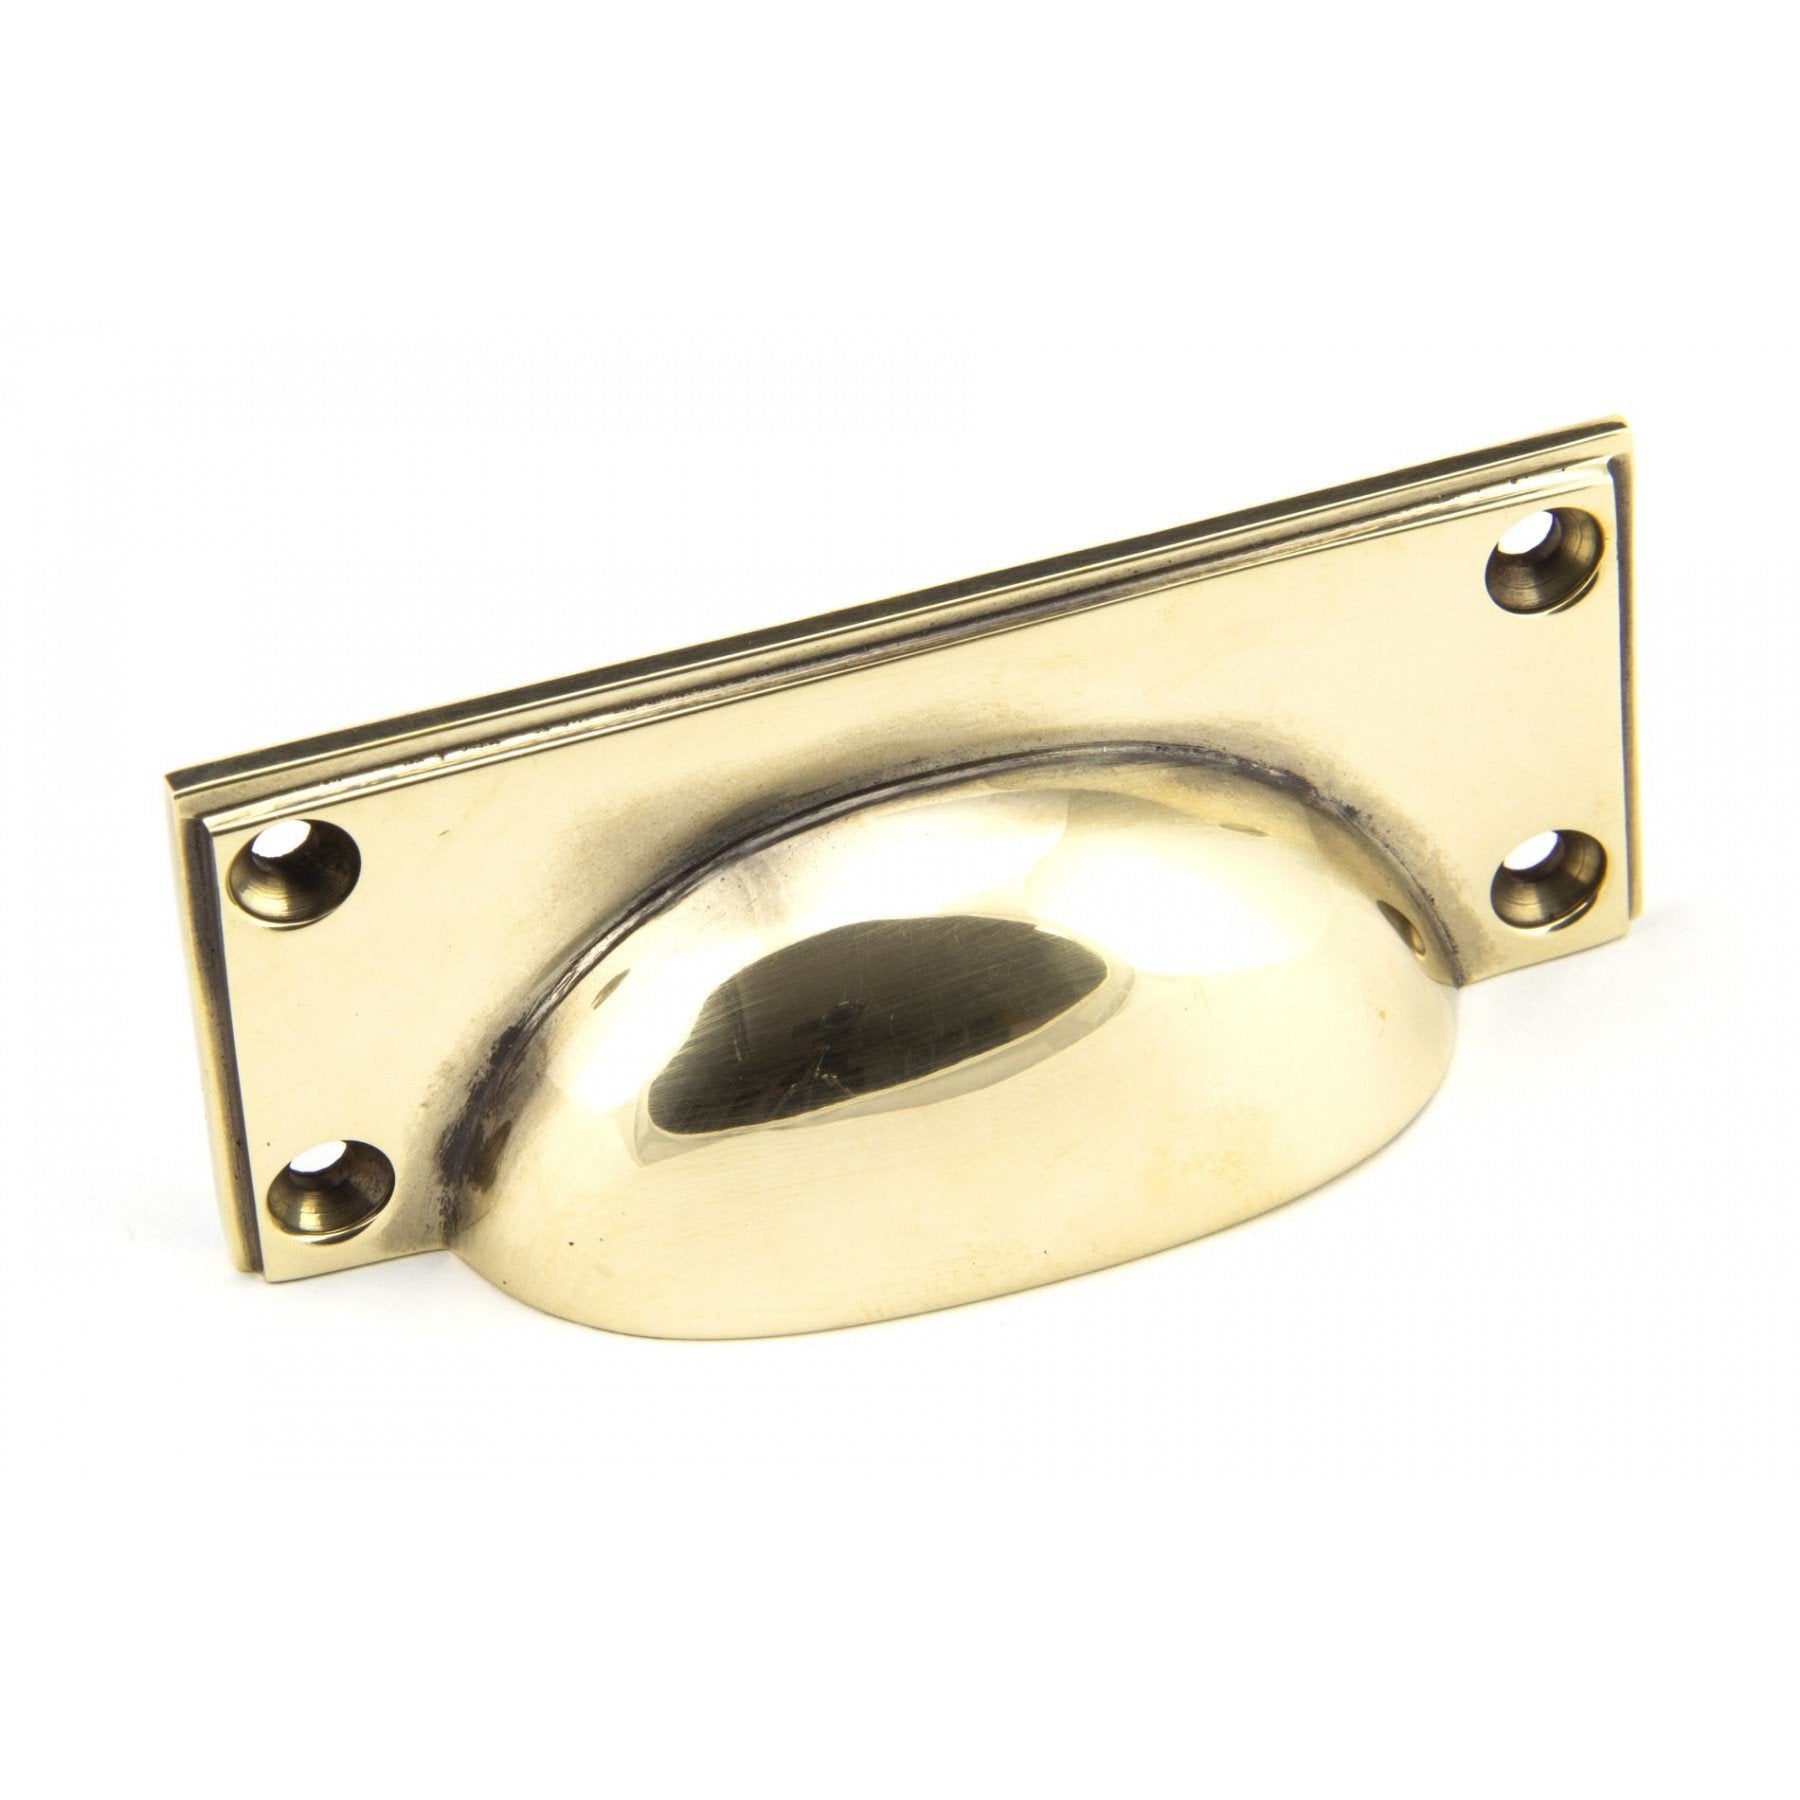 From the Anvil Aged Brass Art Deco Drawer Pull - No.42 Interiors